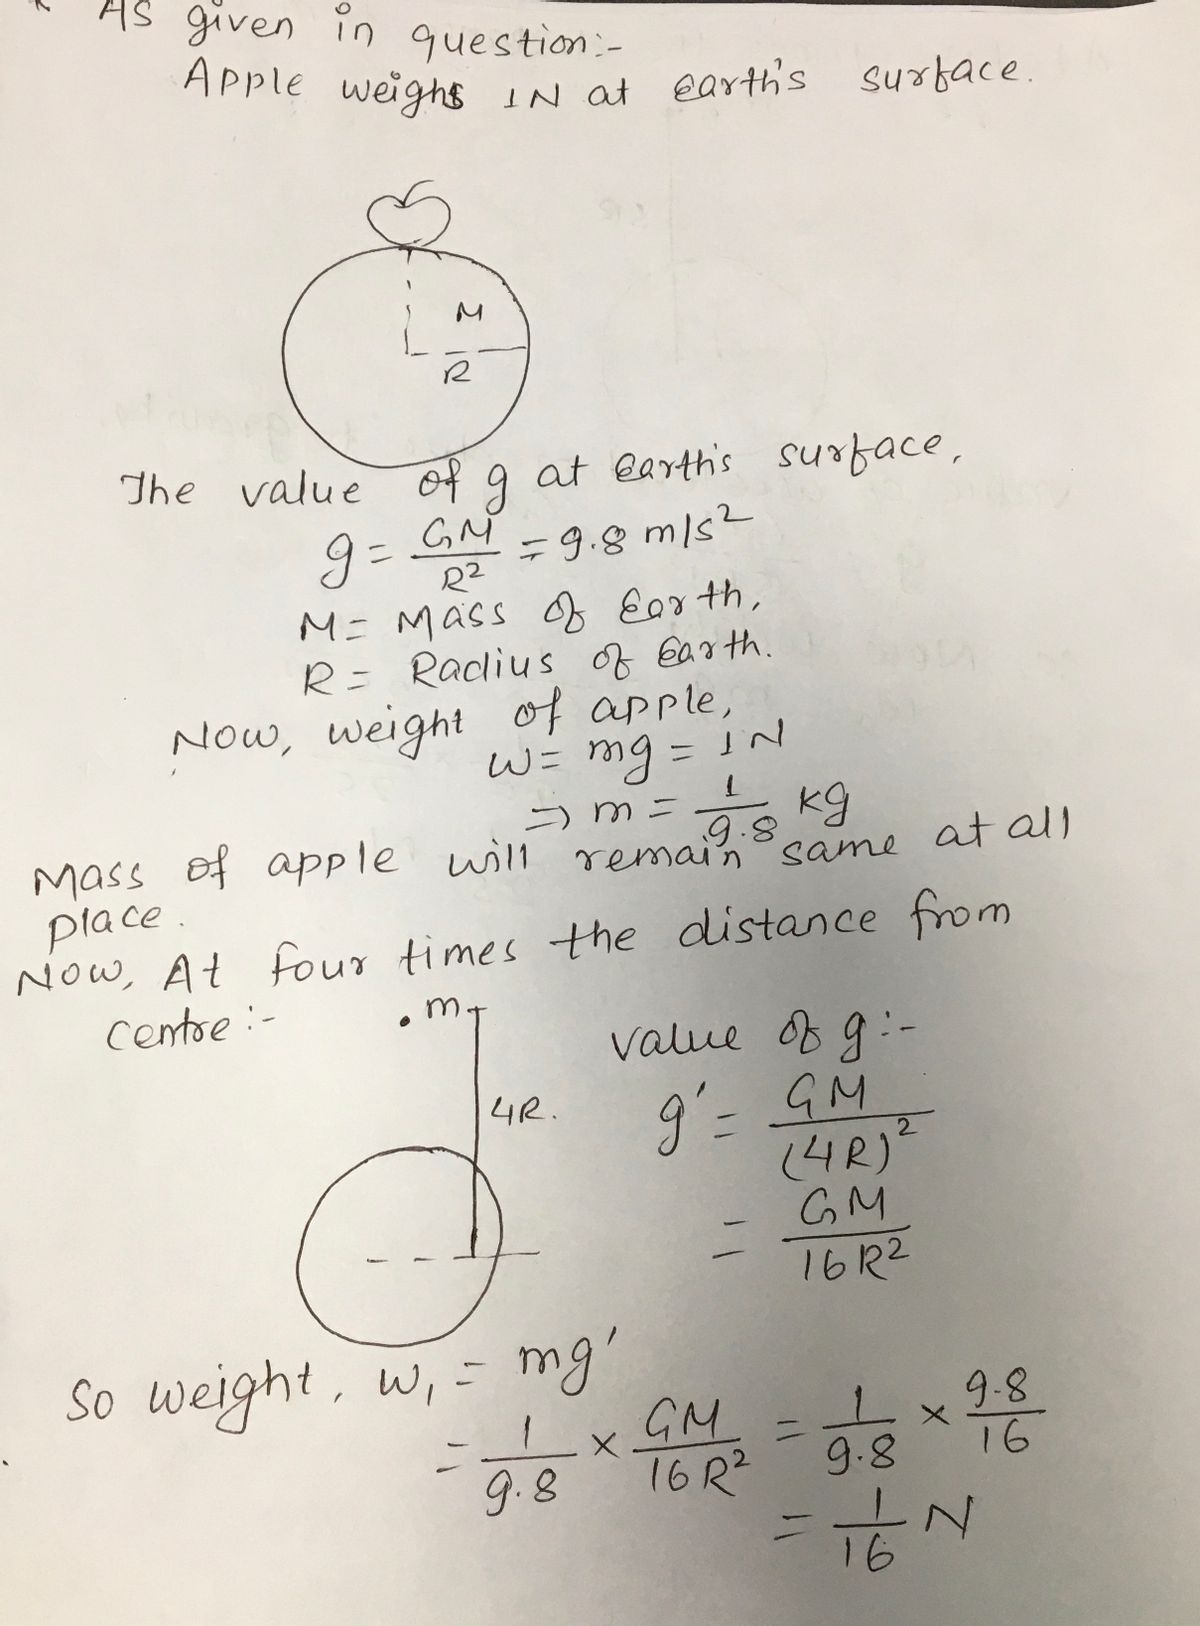 Physics homework question answer, step 1, image 1